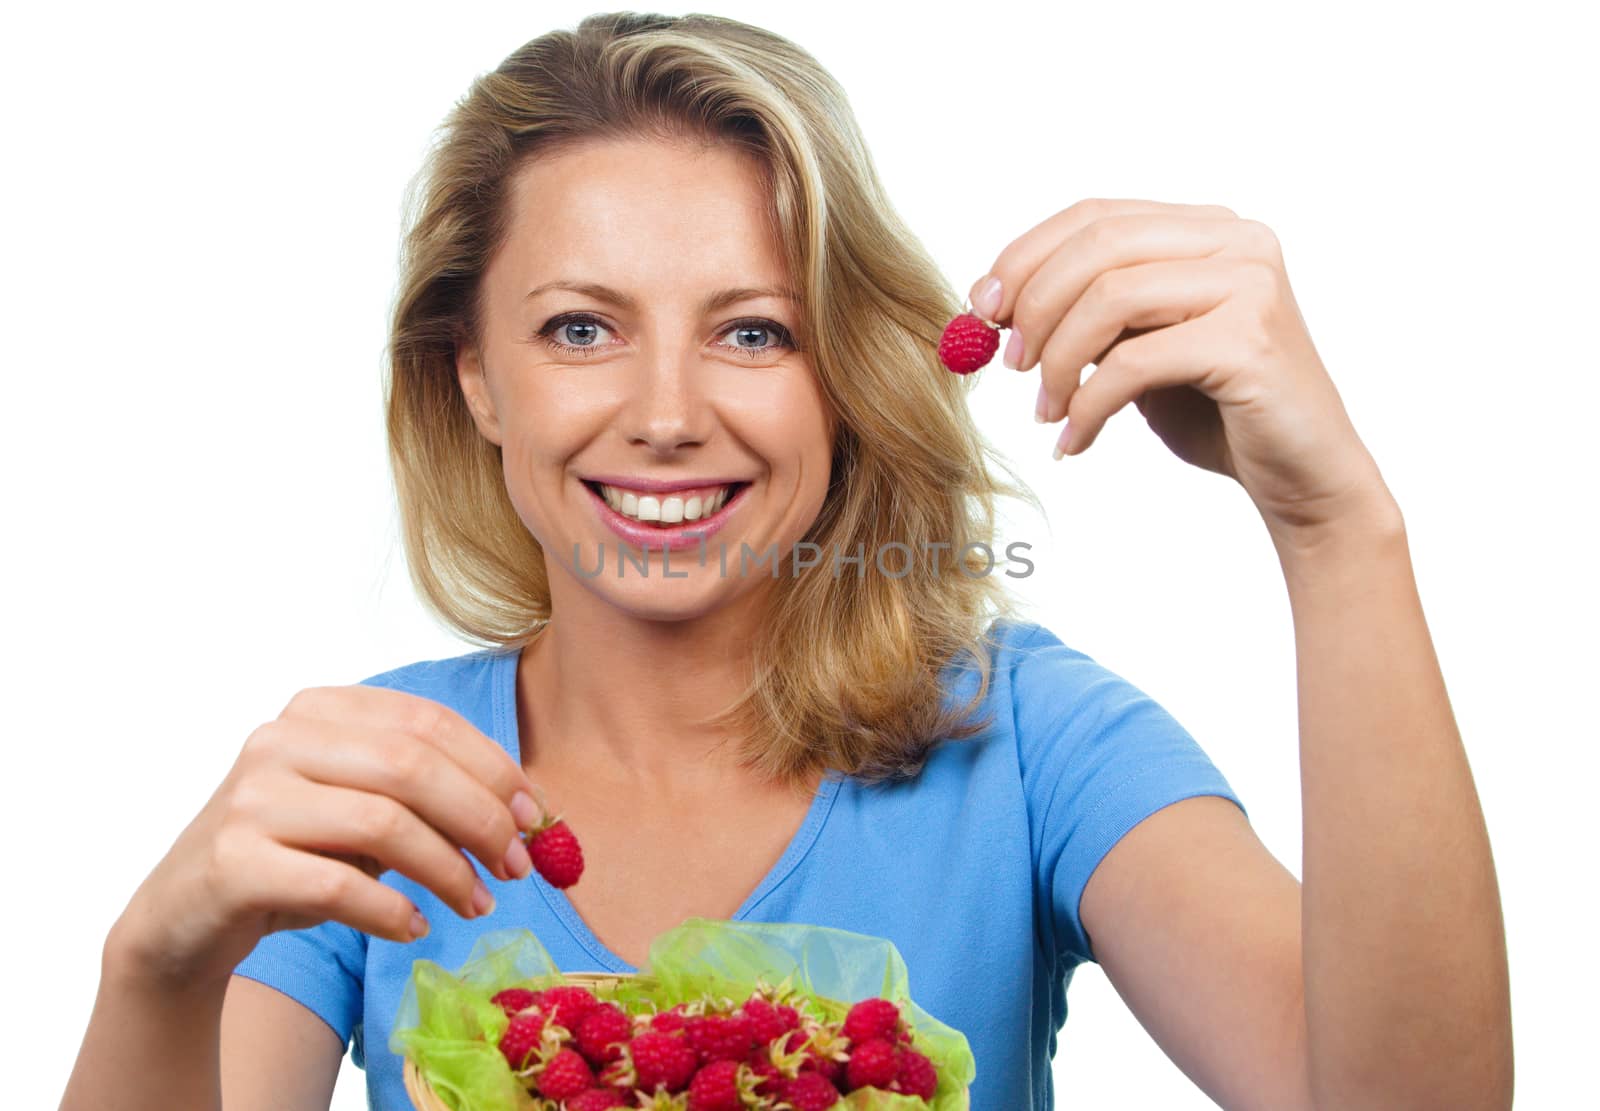 Close up of smiling woman holding raspberries isolated on white